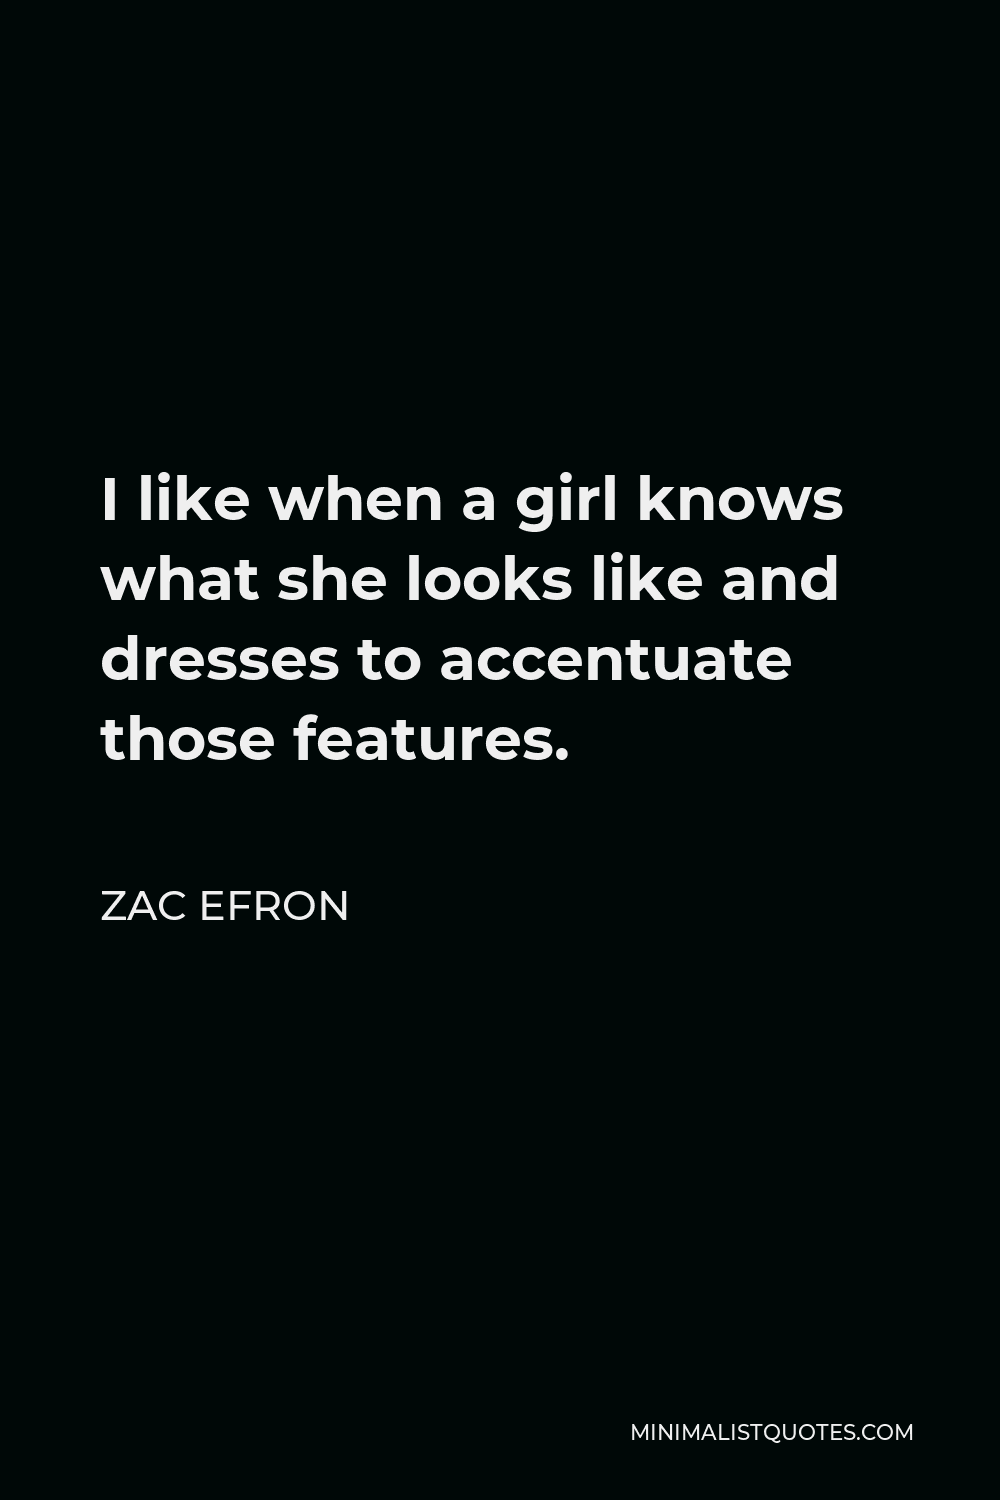 Zac Efron Quote I Like When A Girl Knows What She Looks Like And Dresses To Accentuate Those